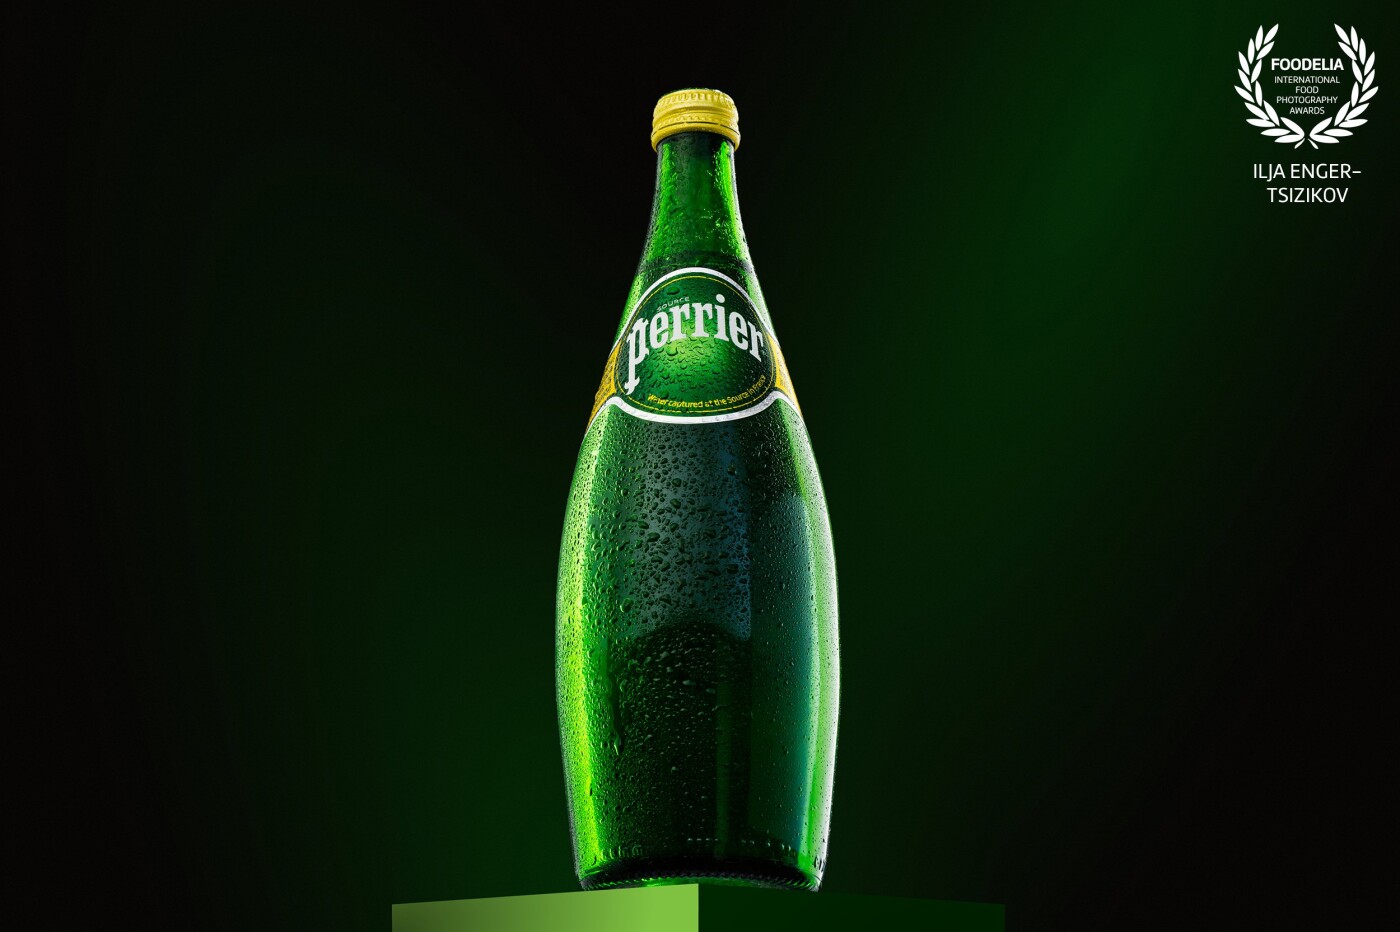 Elegant, sparkling and refreshing. PERRIER Carbonated Mineral Water has delighted generations of beverage seekers for over 150 years, with its unique blend of distinctive bubbles and balanced mineral content ...